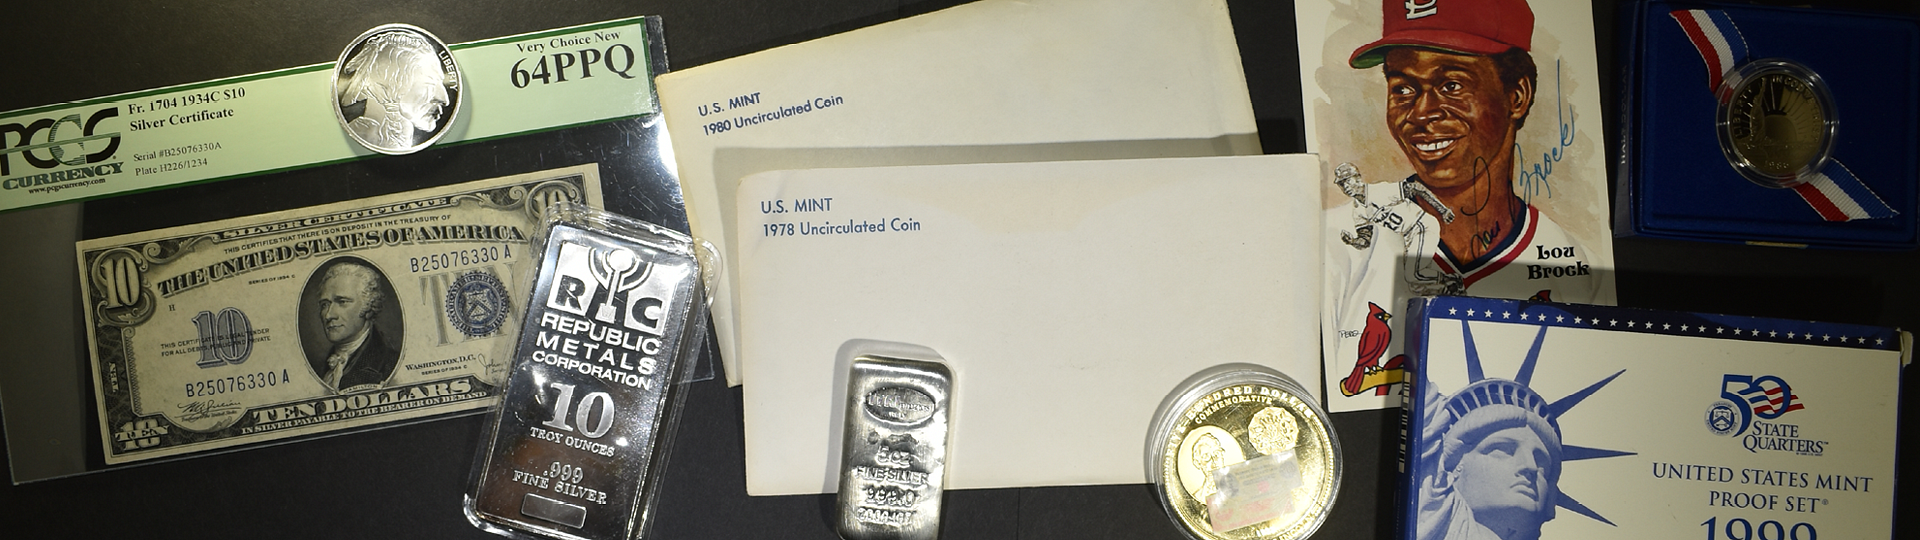 April 23rd Silver City Rare Coins & Currency by Silver City Auctions